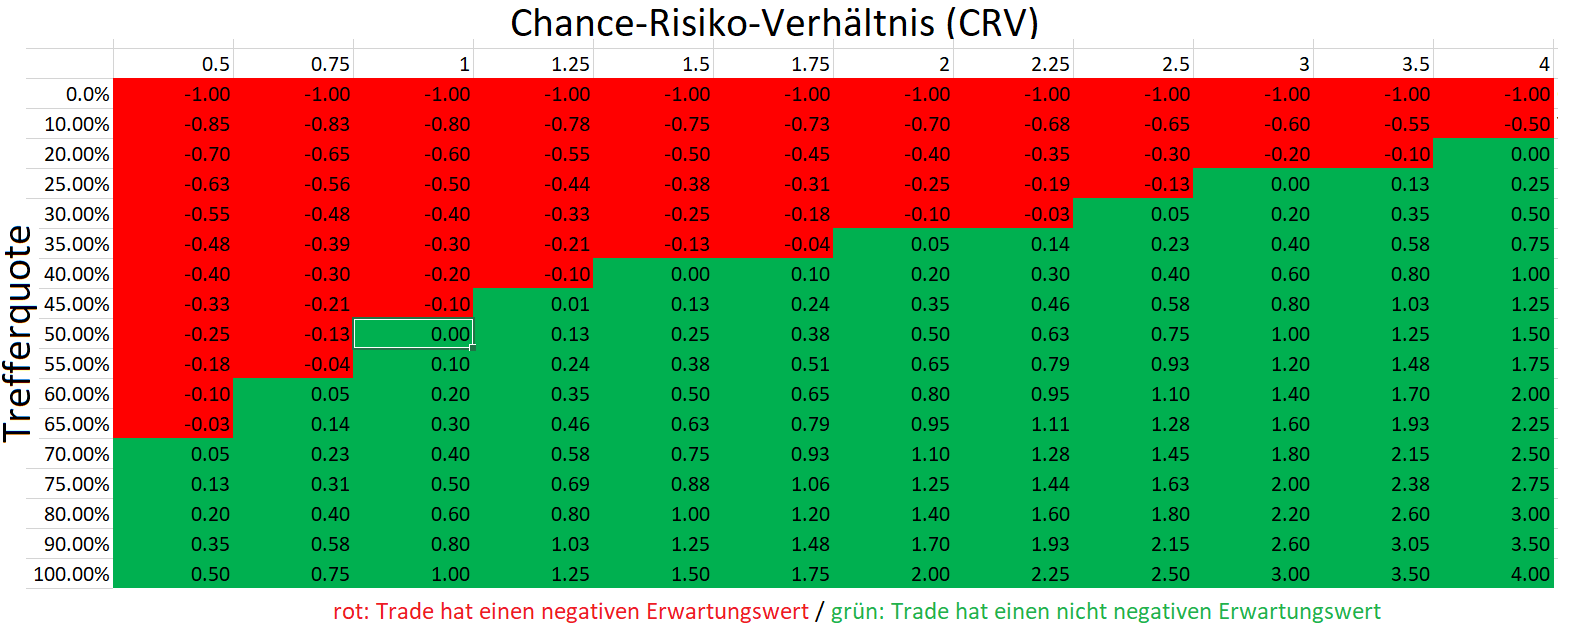 CRV-and-hit-rate-what-every-trader-needs-to-know-Oliver-Baron-GodmodeTrader.de-2